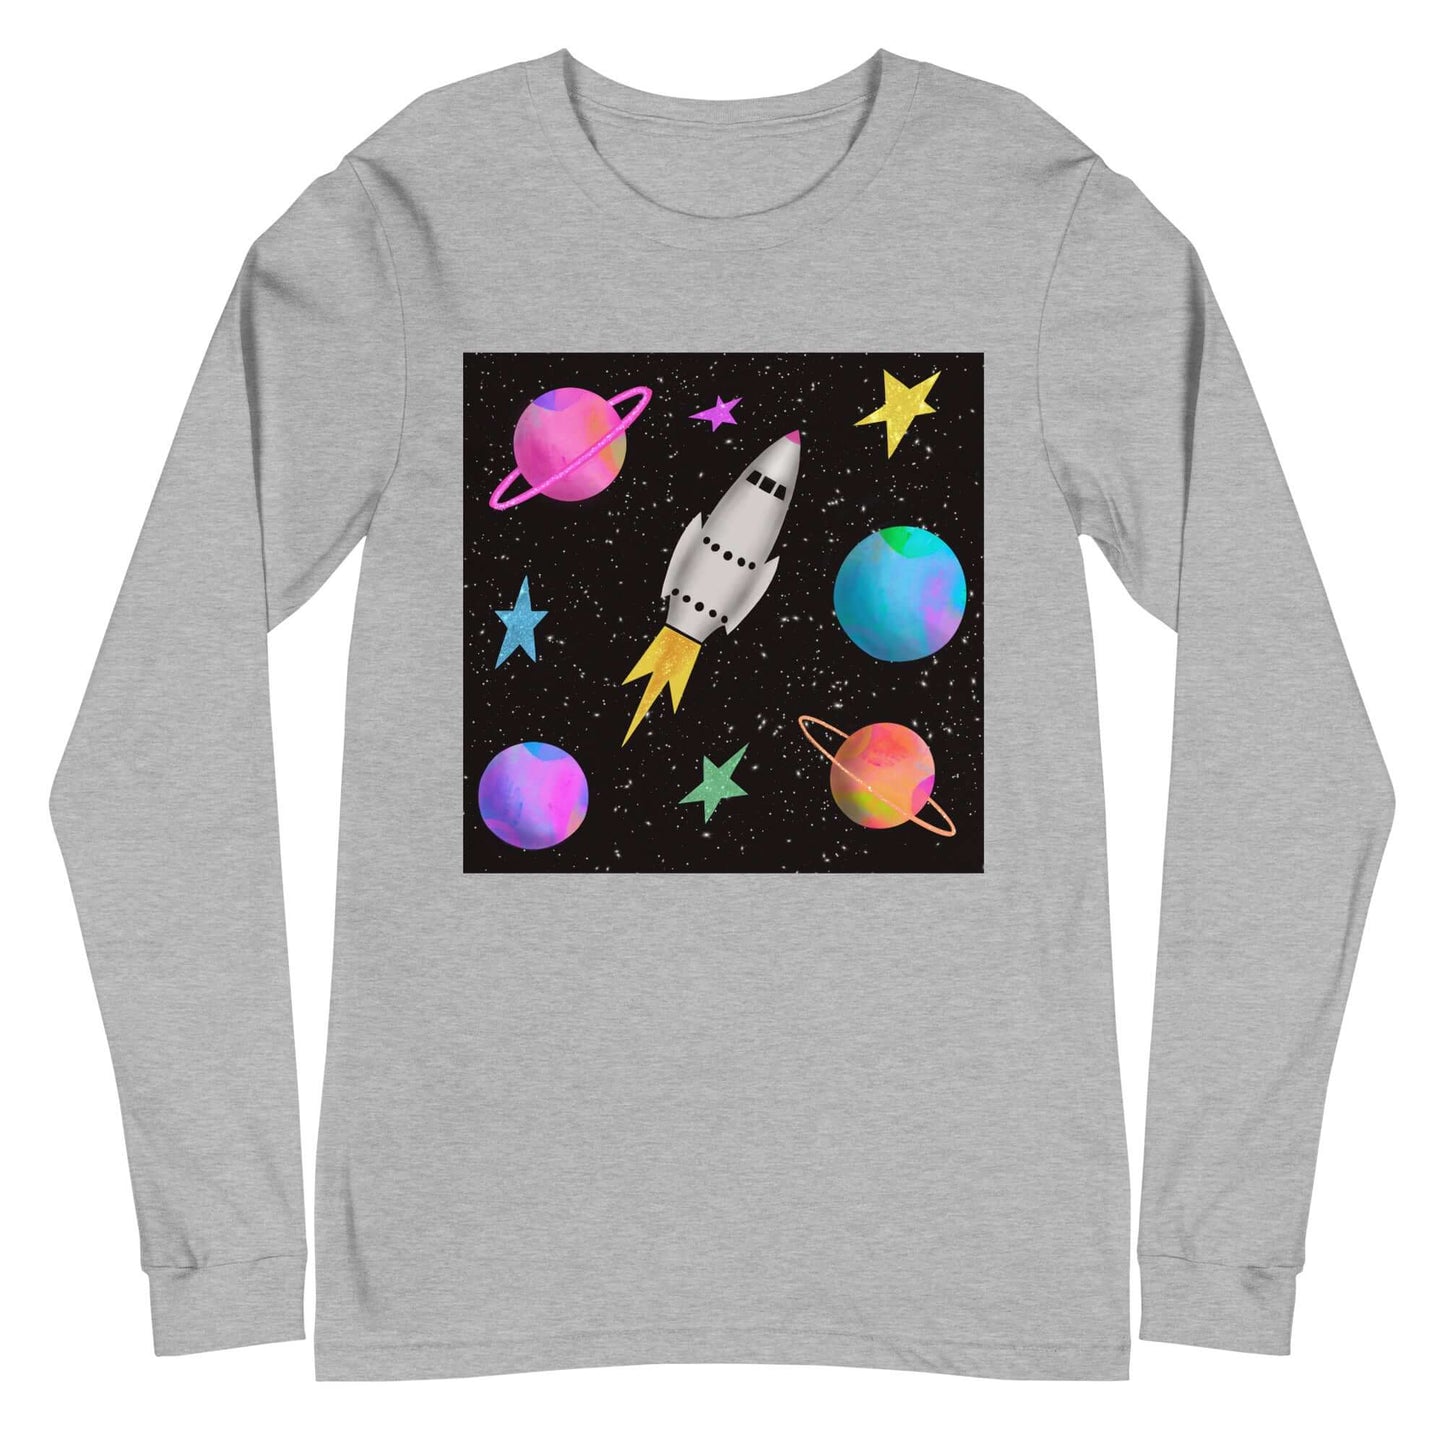 Whimsical Space Rocket with Colorful Planets and Stars on Black Background “Space Rockets” Unisex Long Sleeve Tee in Athletic Heather Gray 